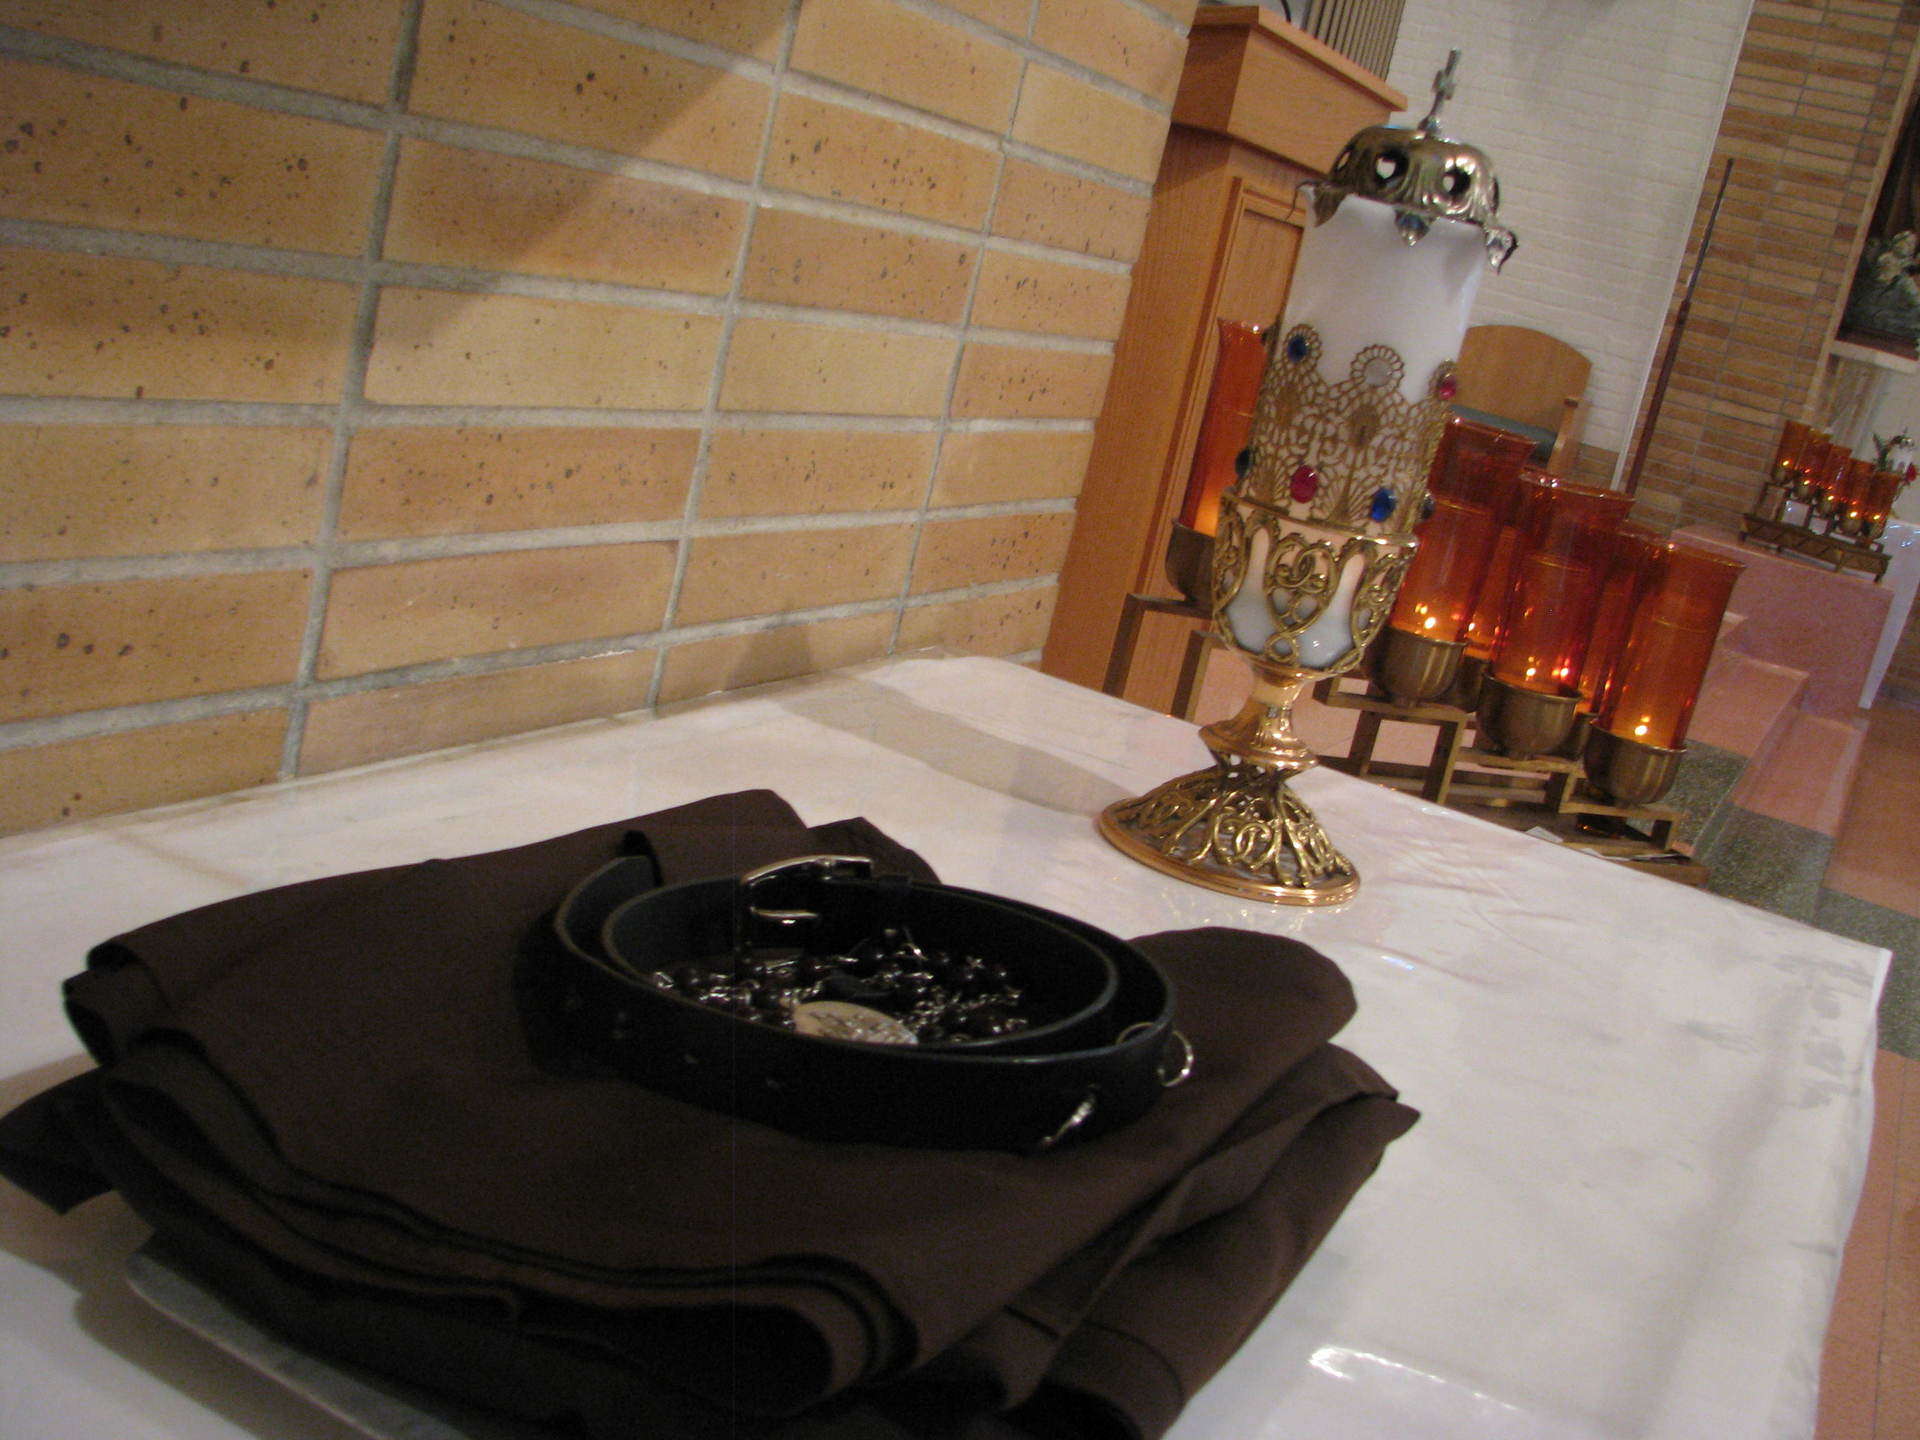 Habit, belt and rosary resting on altar